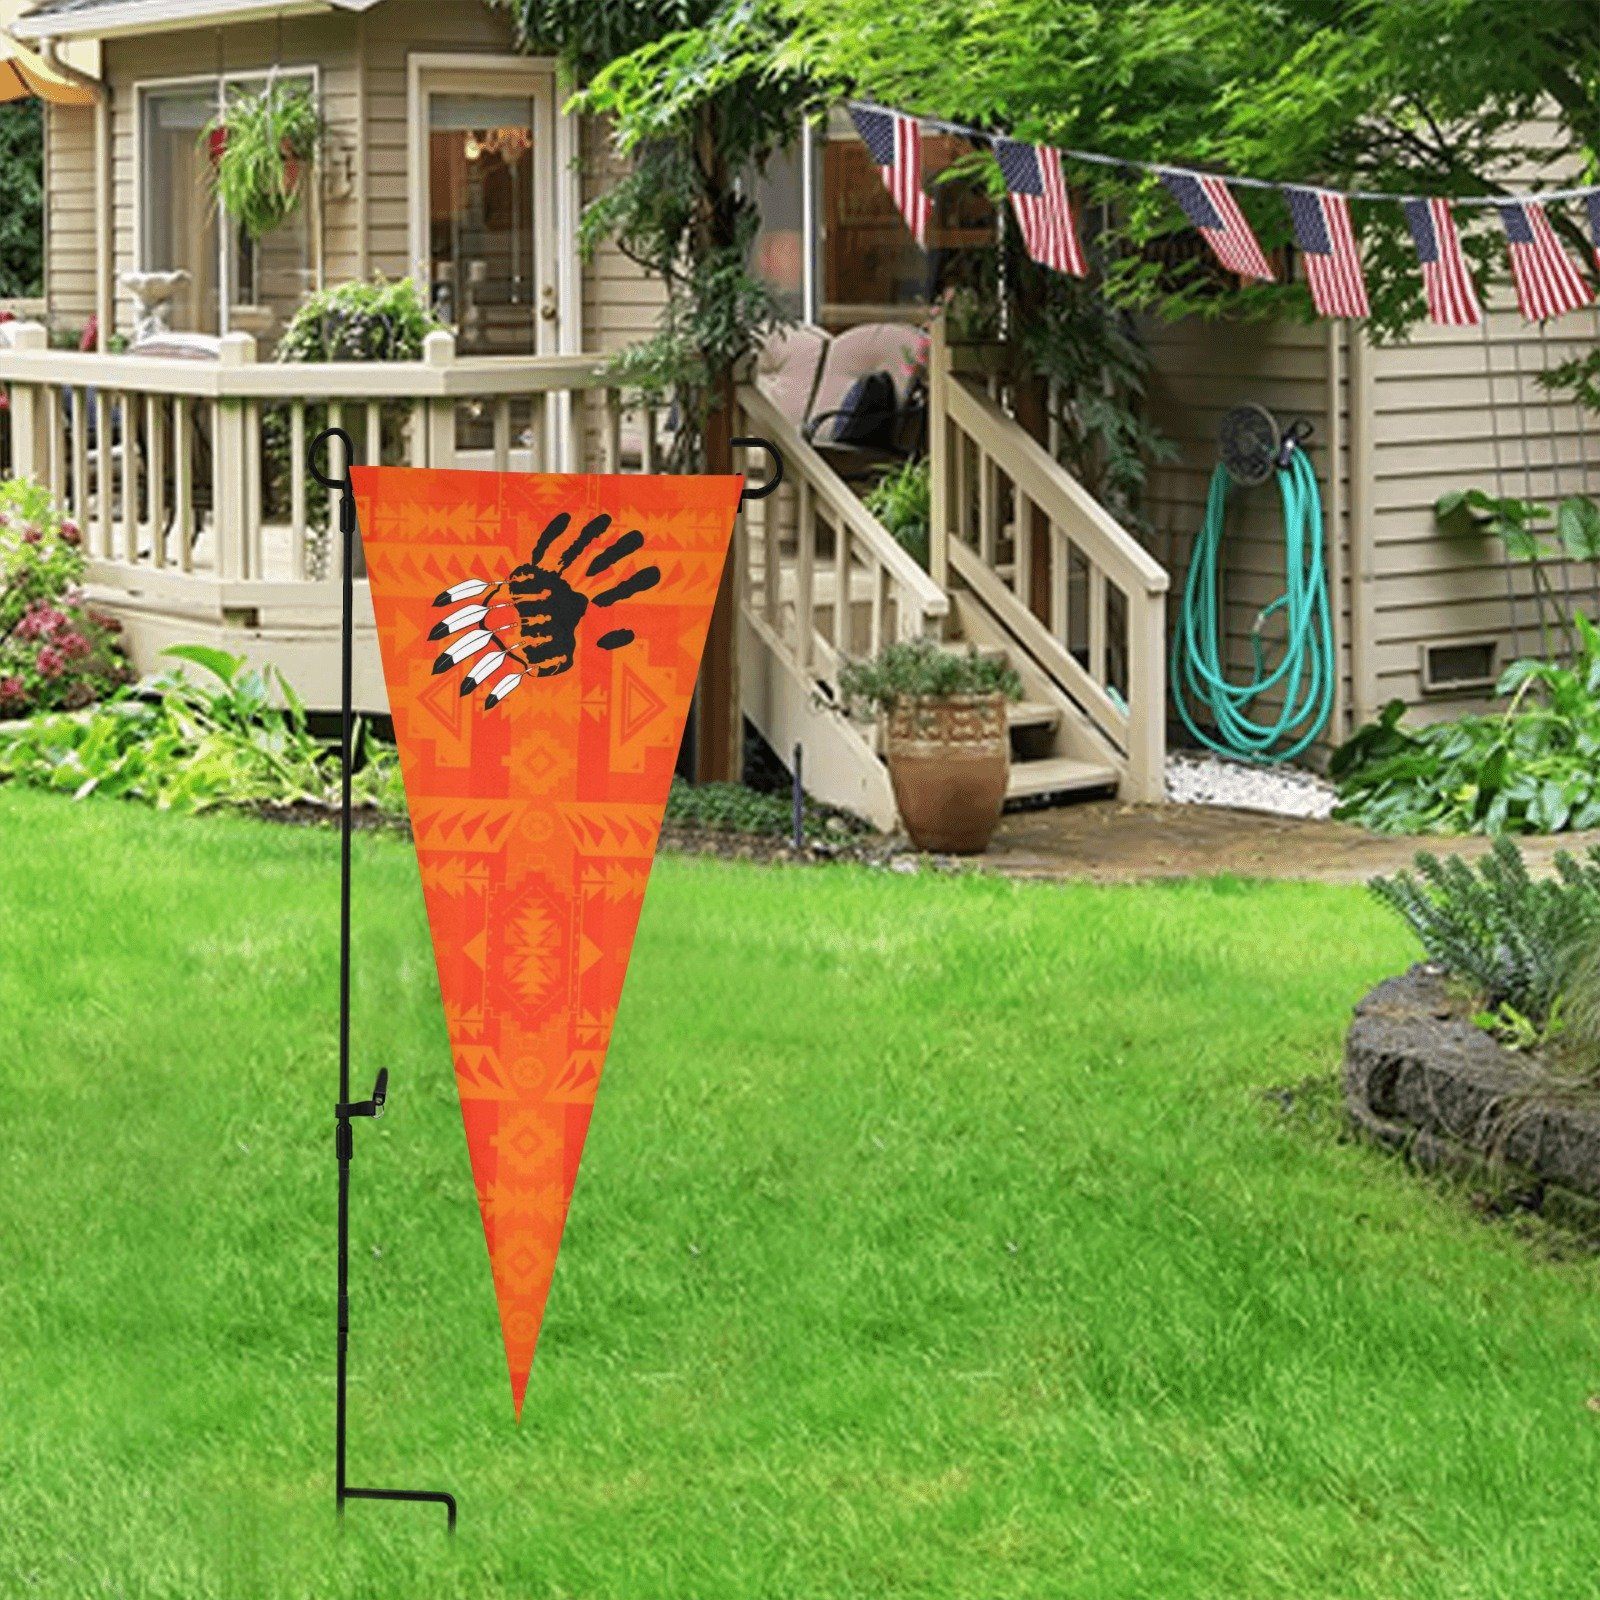 Chiefs Mountain Orange A feather for each Trigonal Garden Flag 30"x12" Trigonal Garden Flag 30"x12" e-joyer 